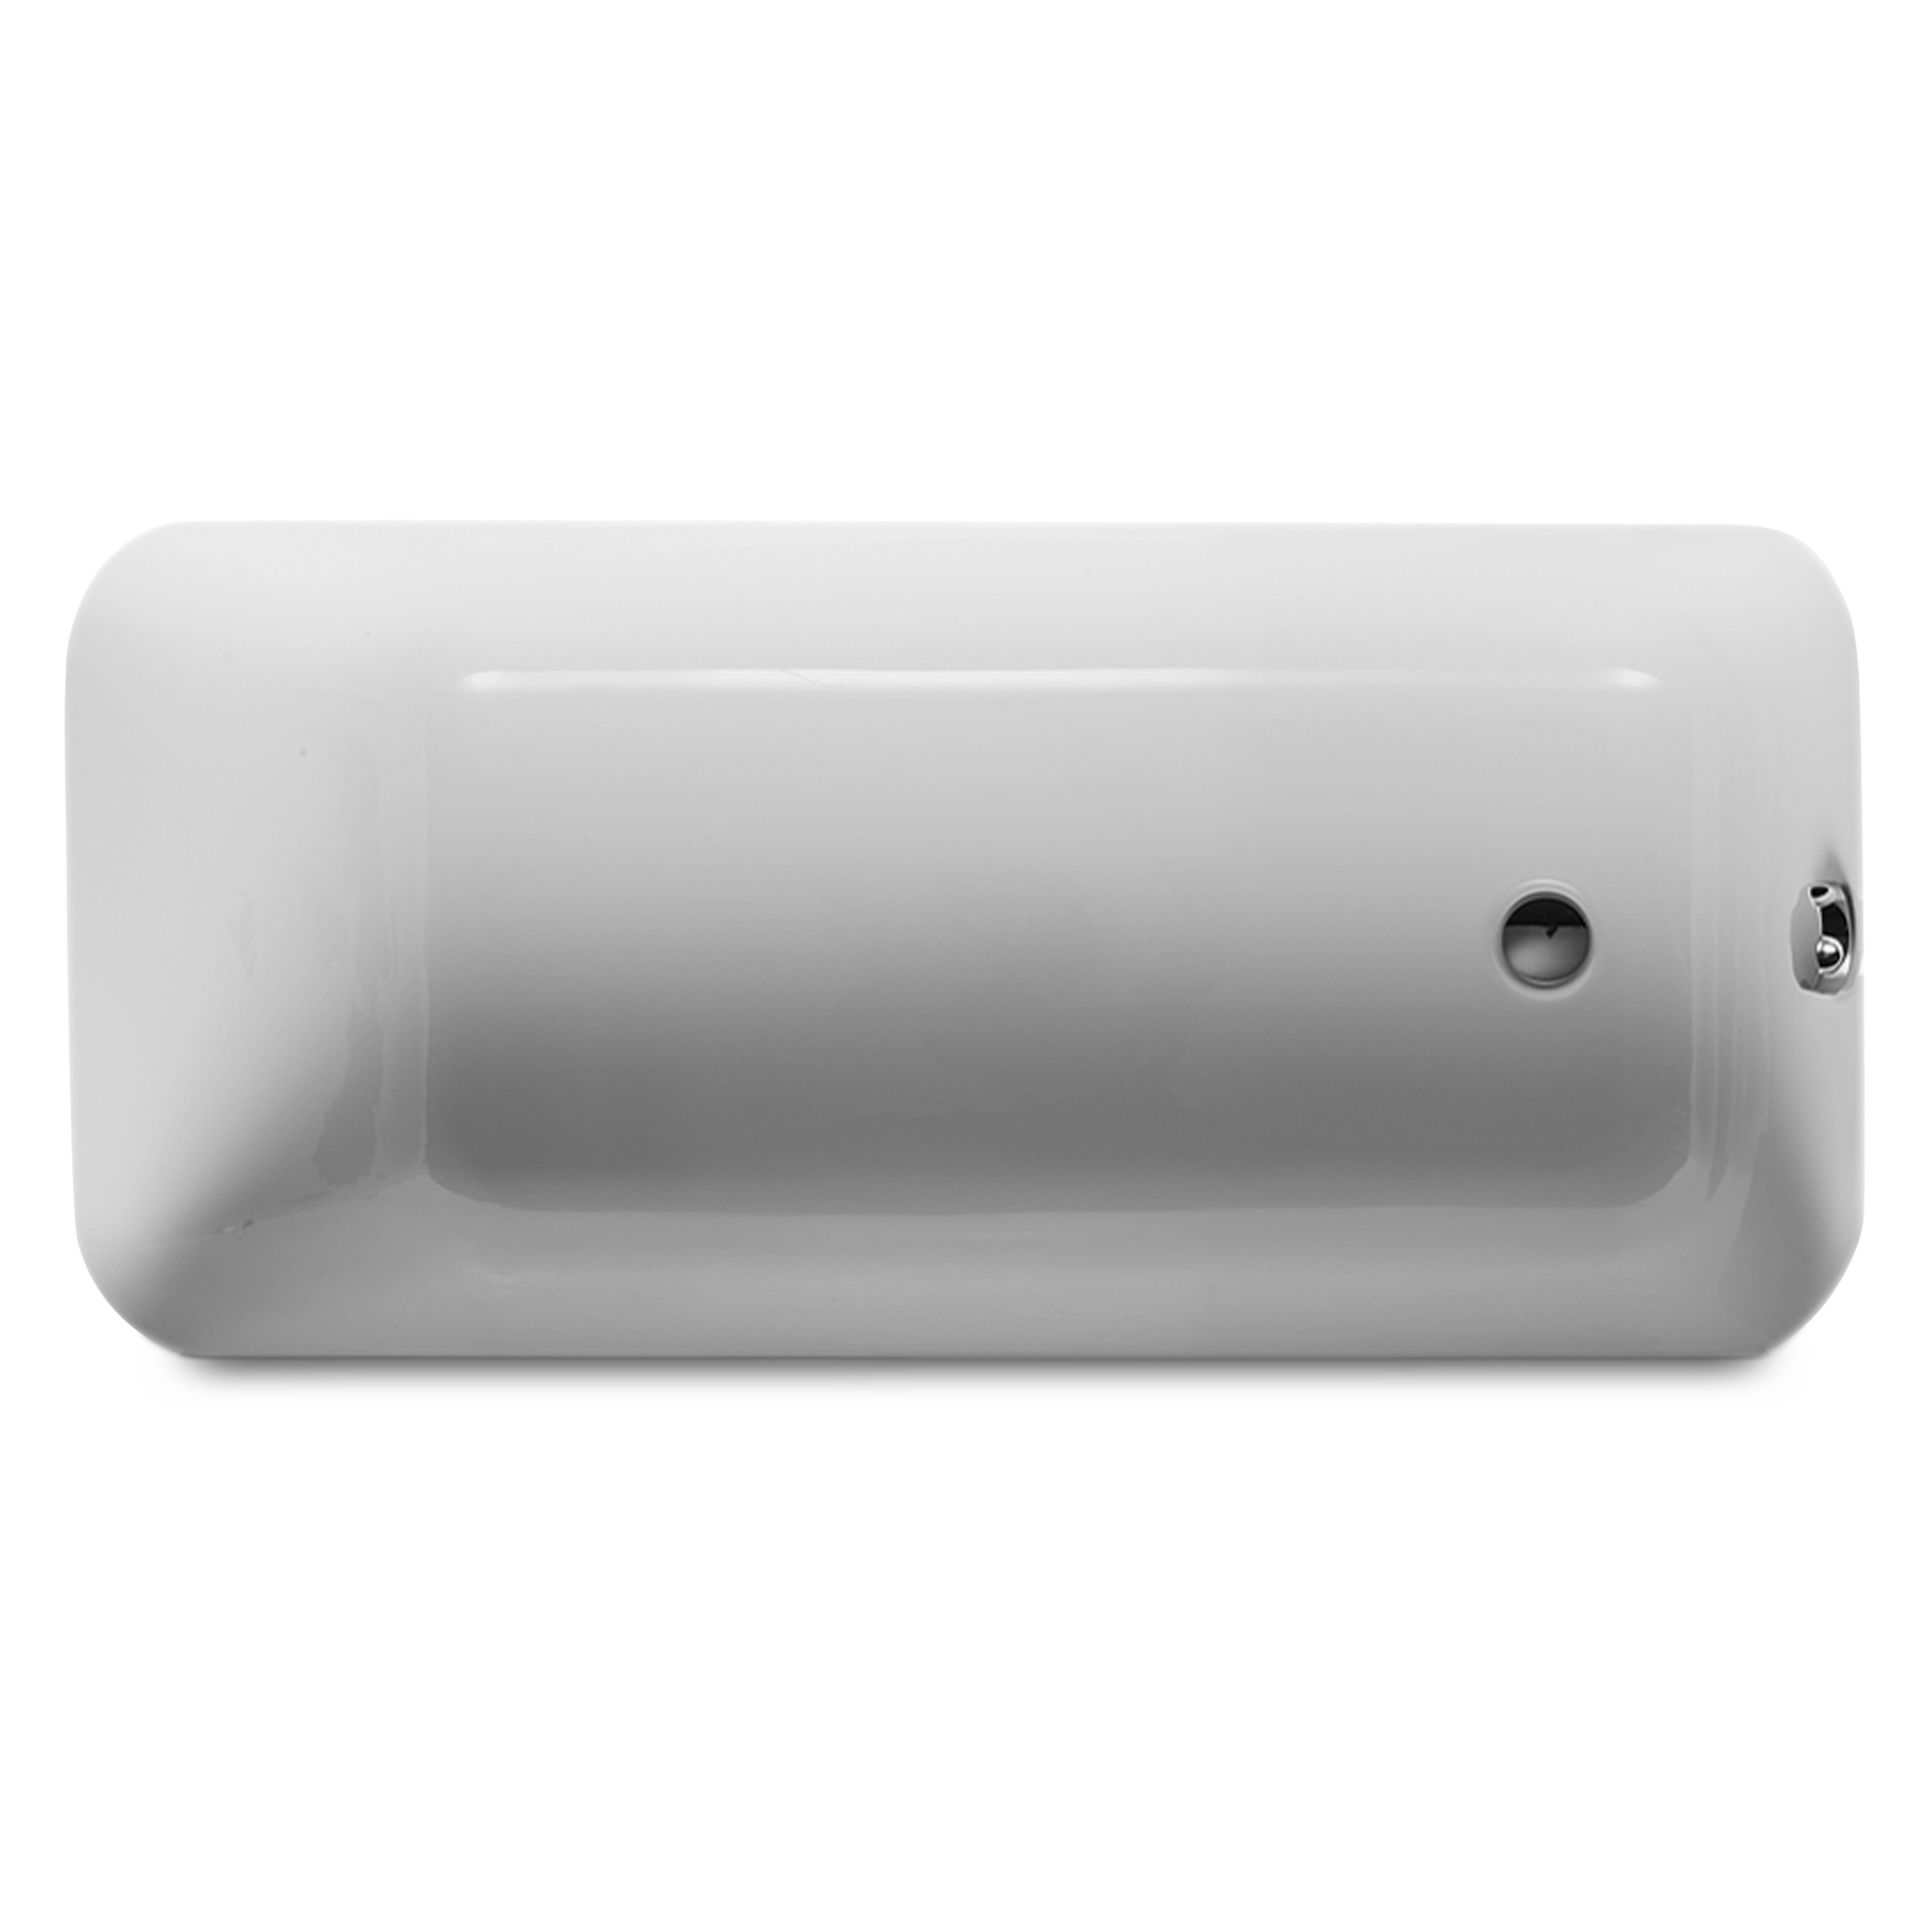 The Decade bath is thoughtfully designed to fit small spaces.